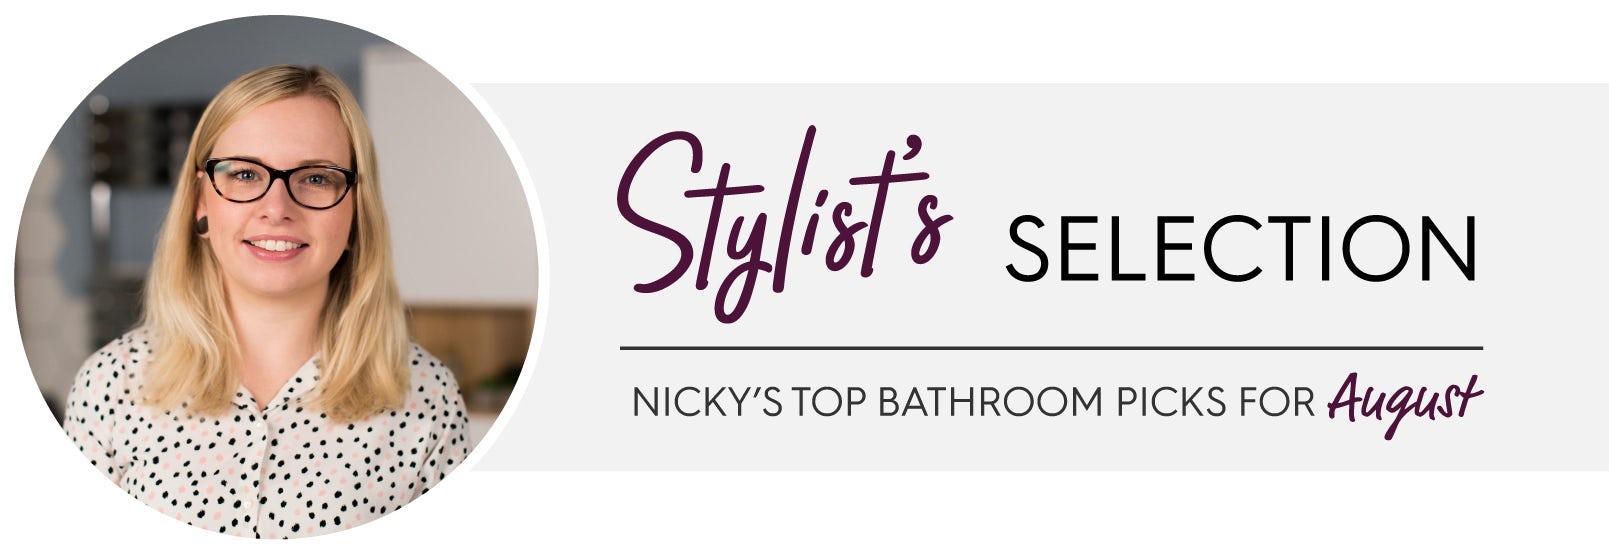 Stylist’s Selection: Nicky’s top bathroom picks for August